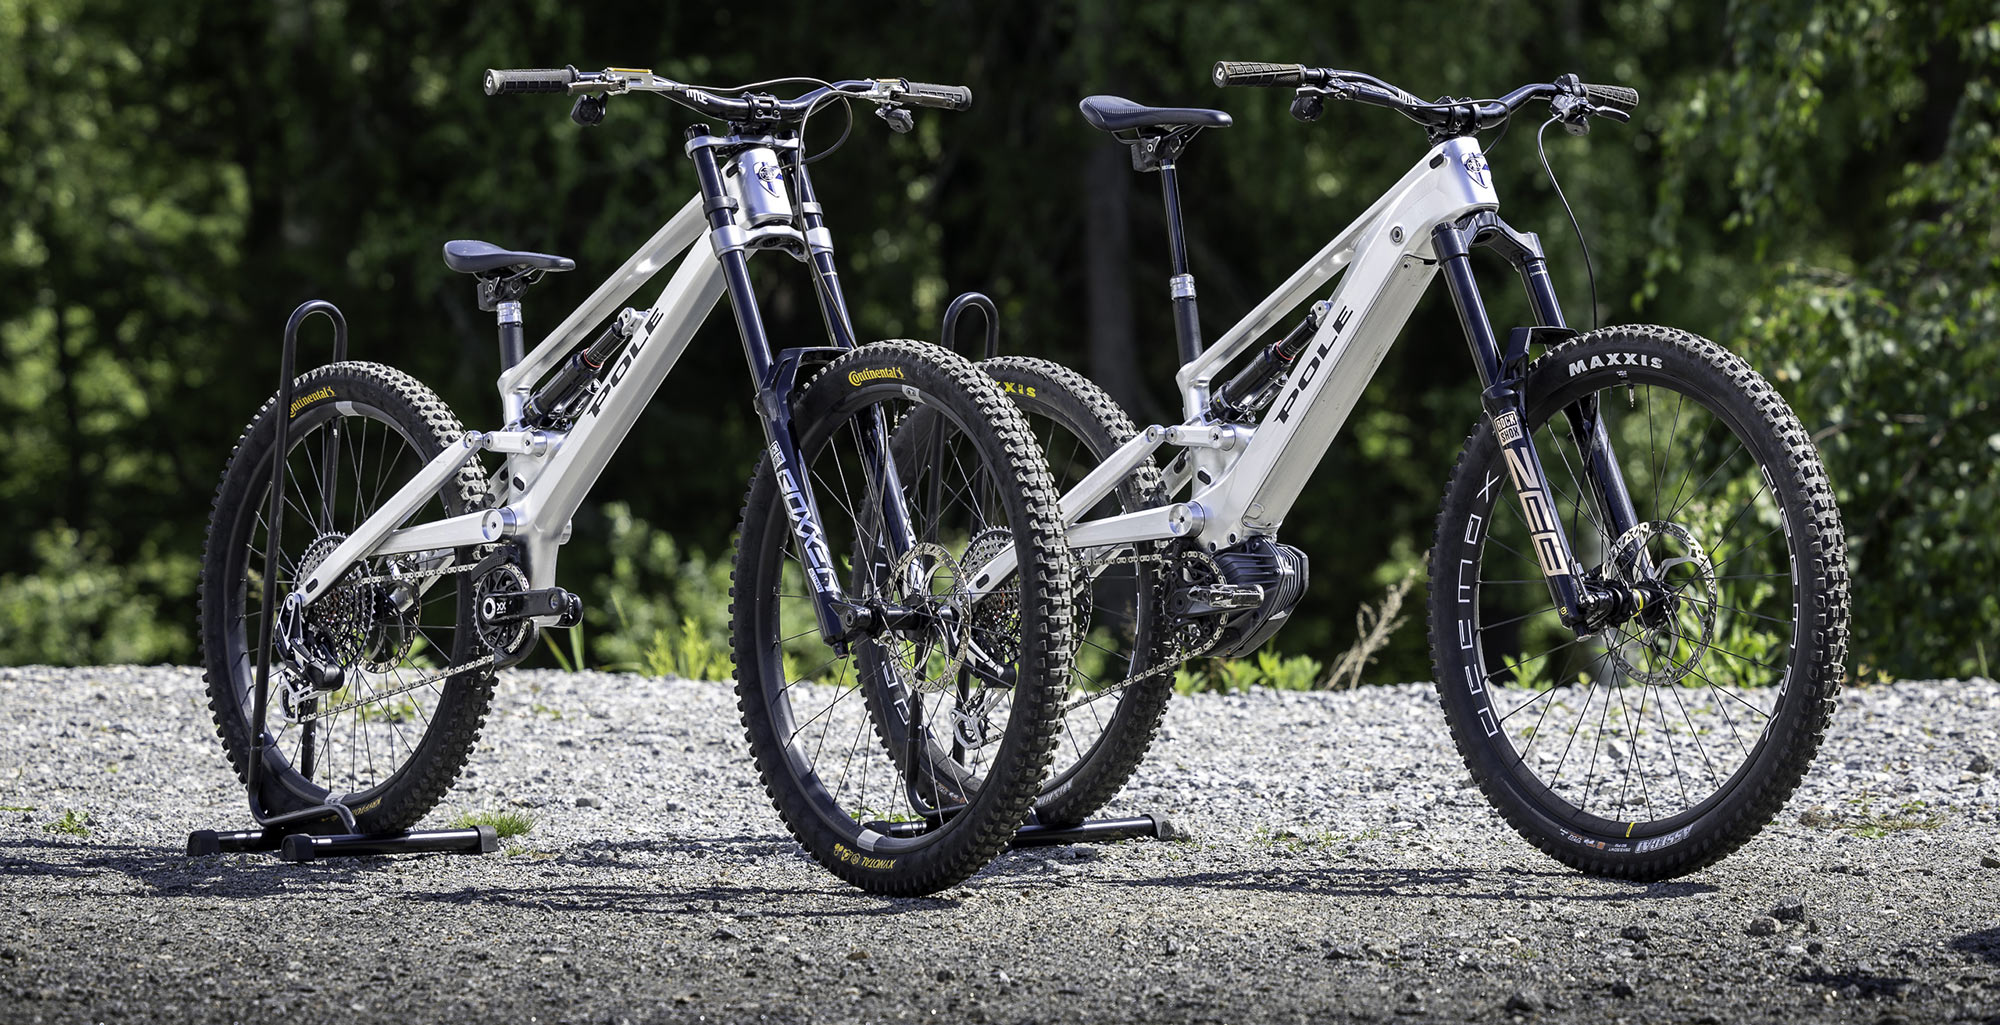 Pole Onni DH bike & Sonni eMTB gravity ebike made-in-Finland from CNC alloy